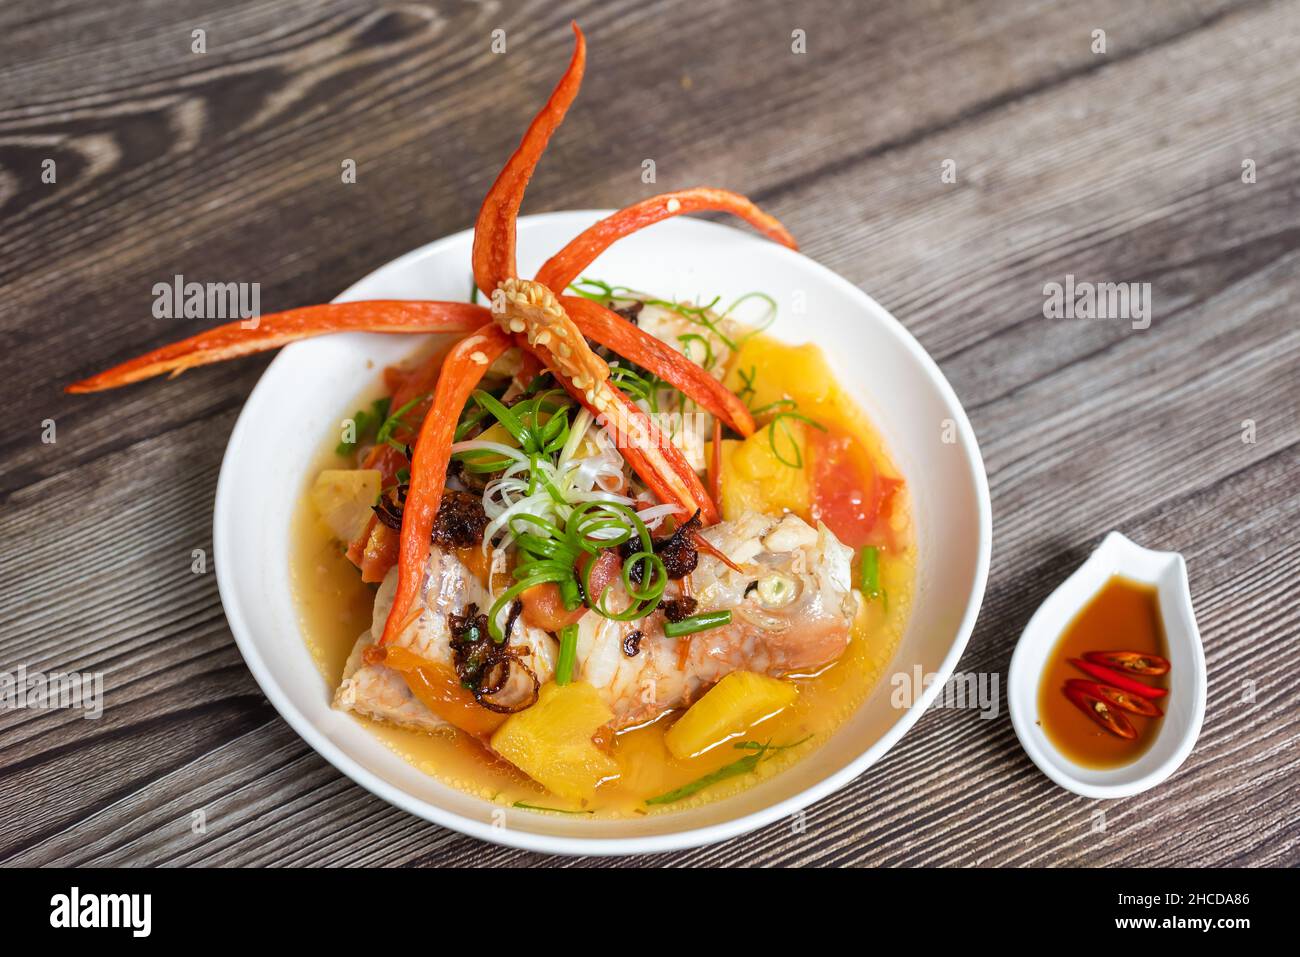 Steamed red snapper fish with ingredients including fish, pineapple, tomato, chili and spices Stock Photo